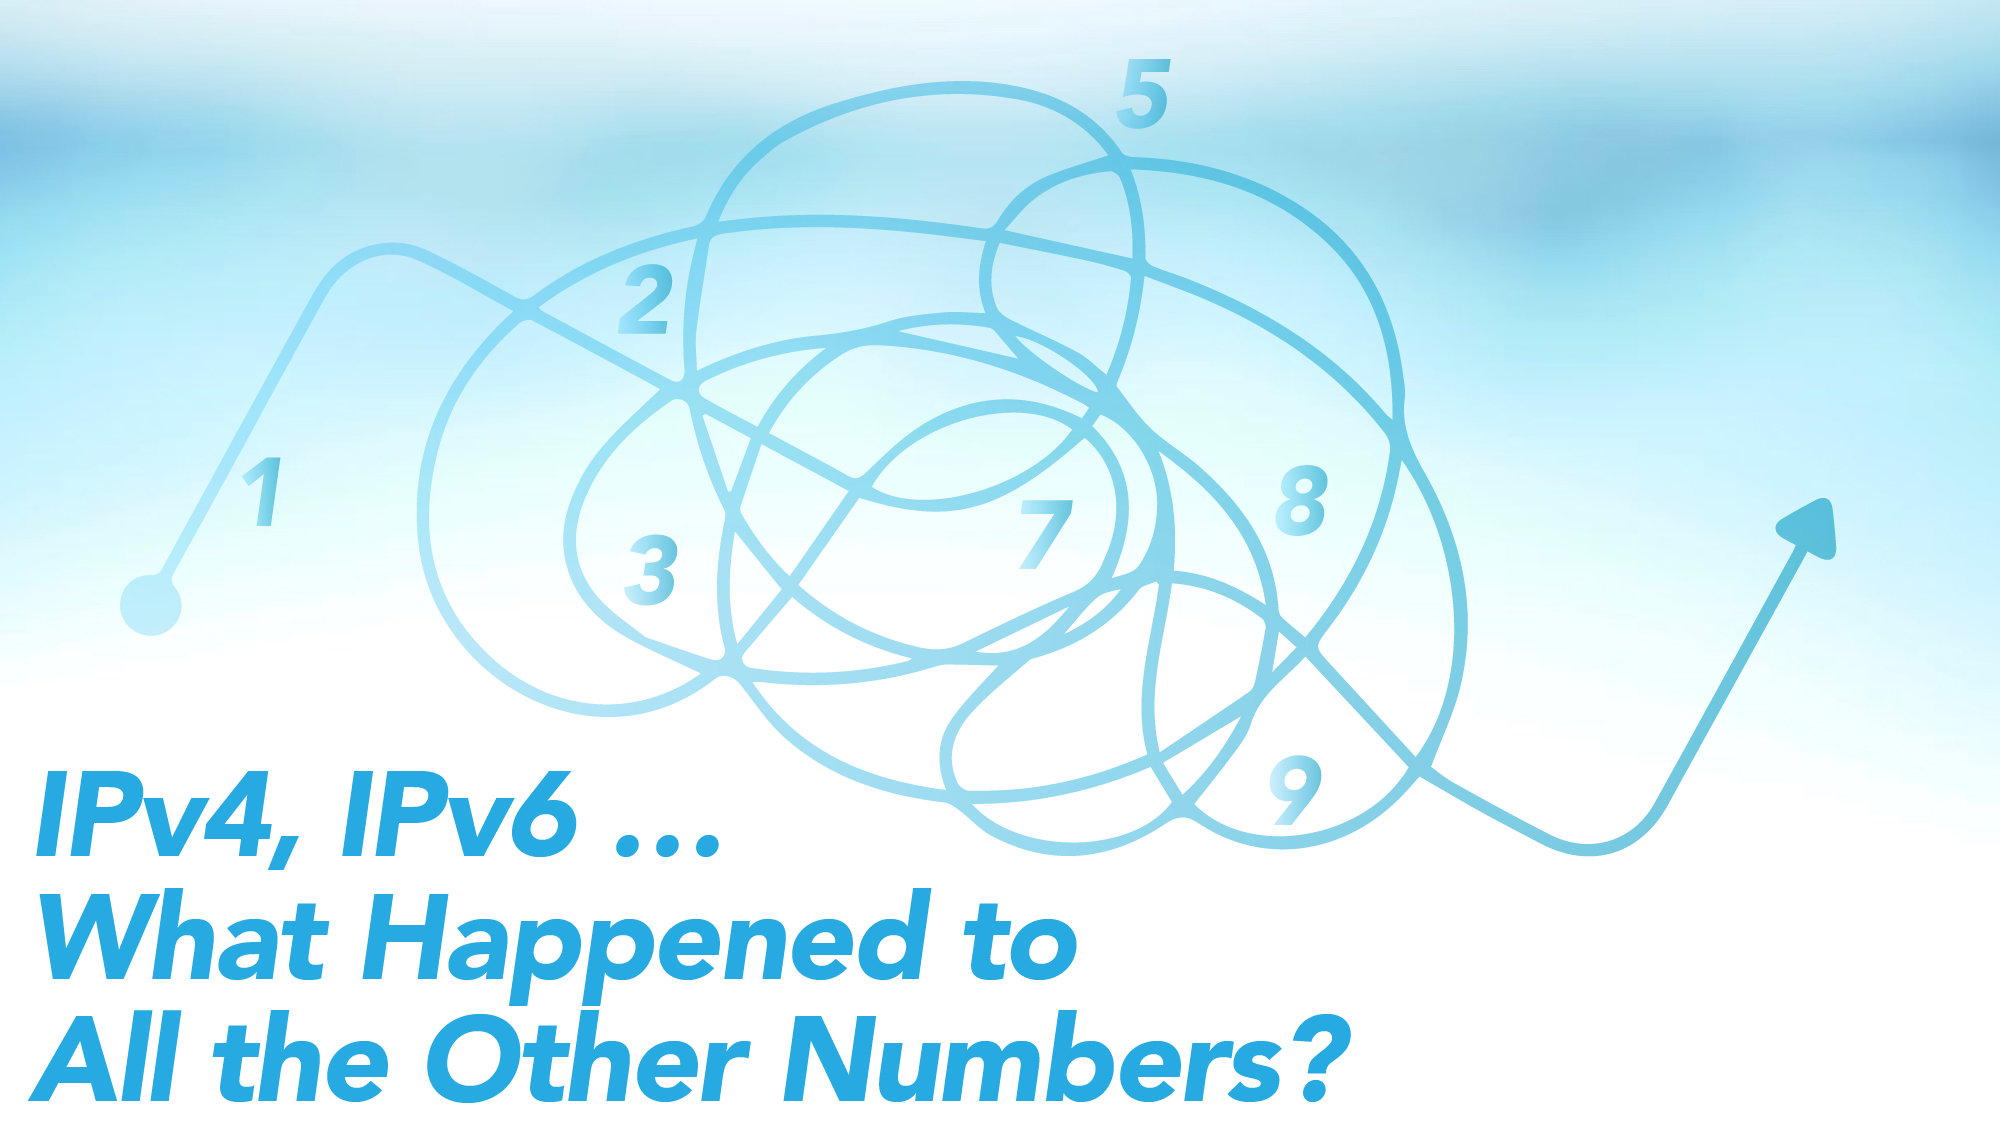 IPv4, IPv6 … What Happened to All the Other Numbers?